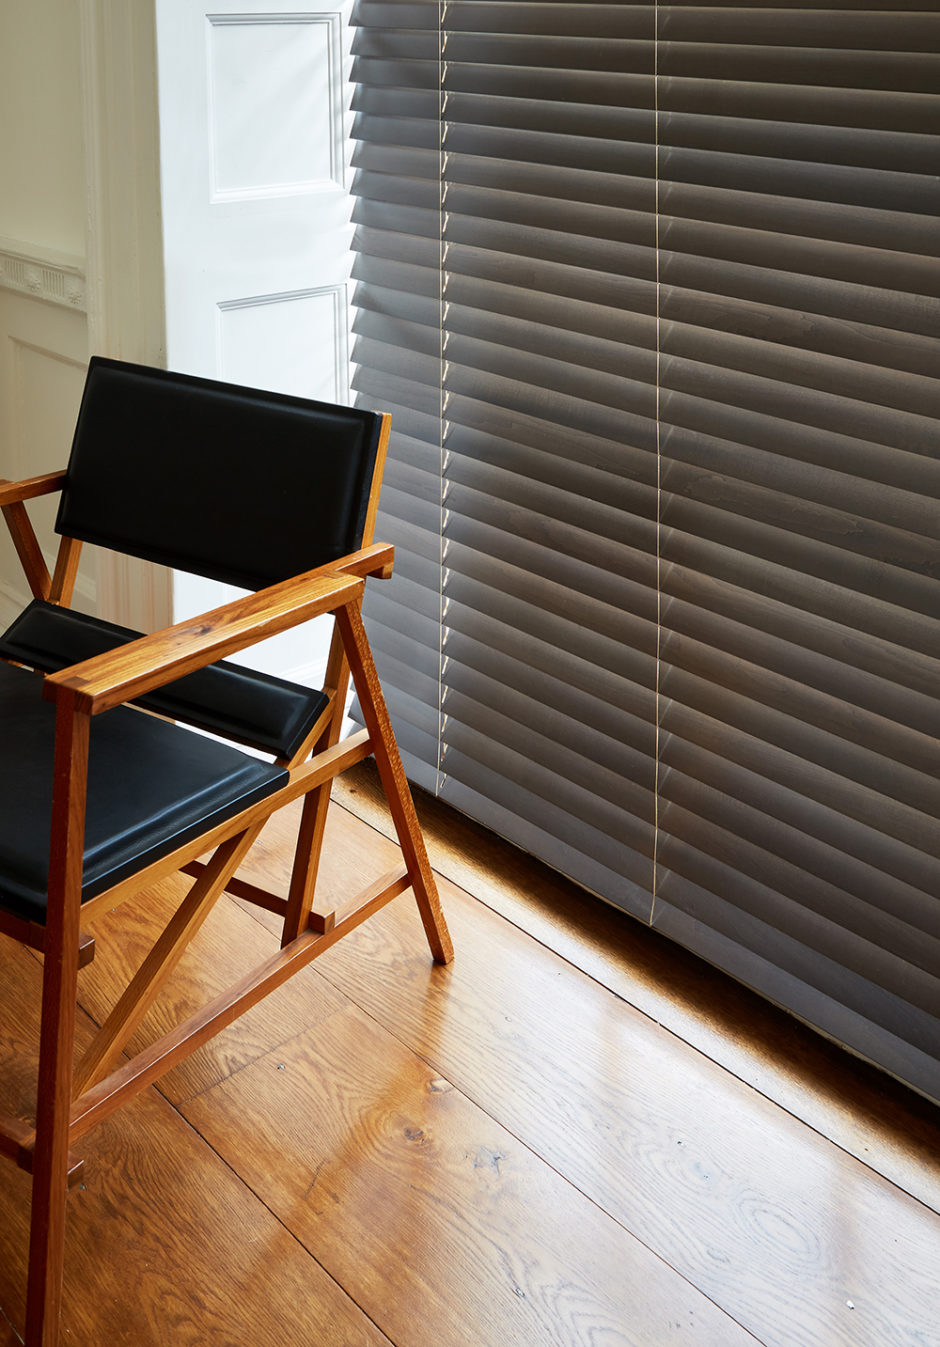 Wooden Blinds For Patio Doors, Can You Have Perfect Fit Blinds On Sliding Patio Doors